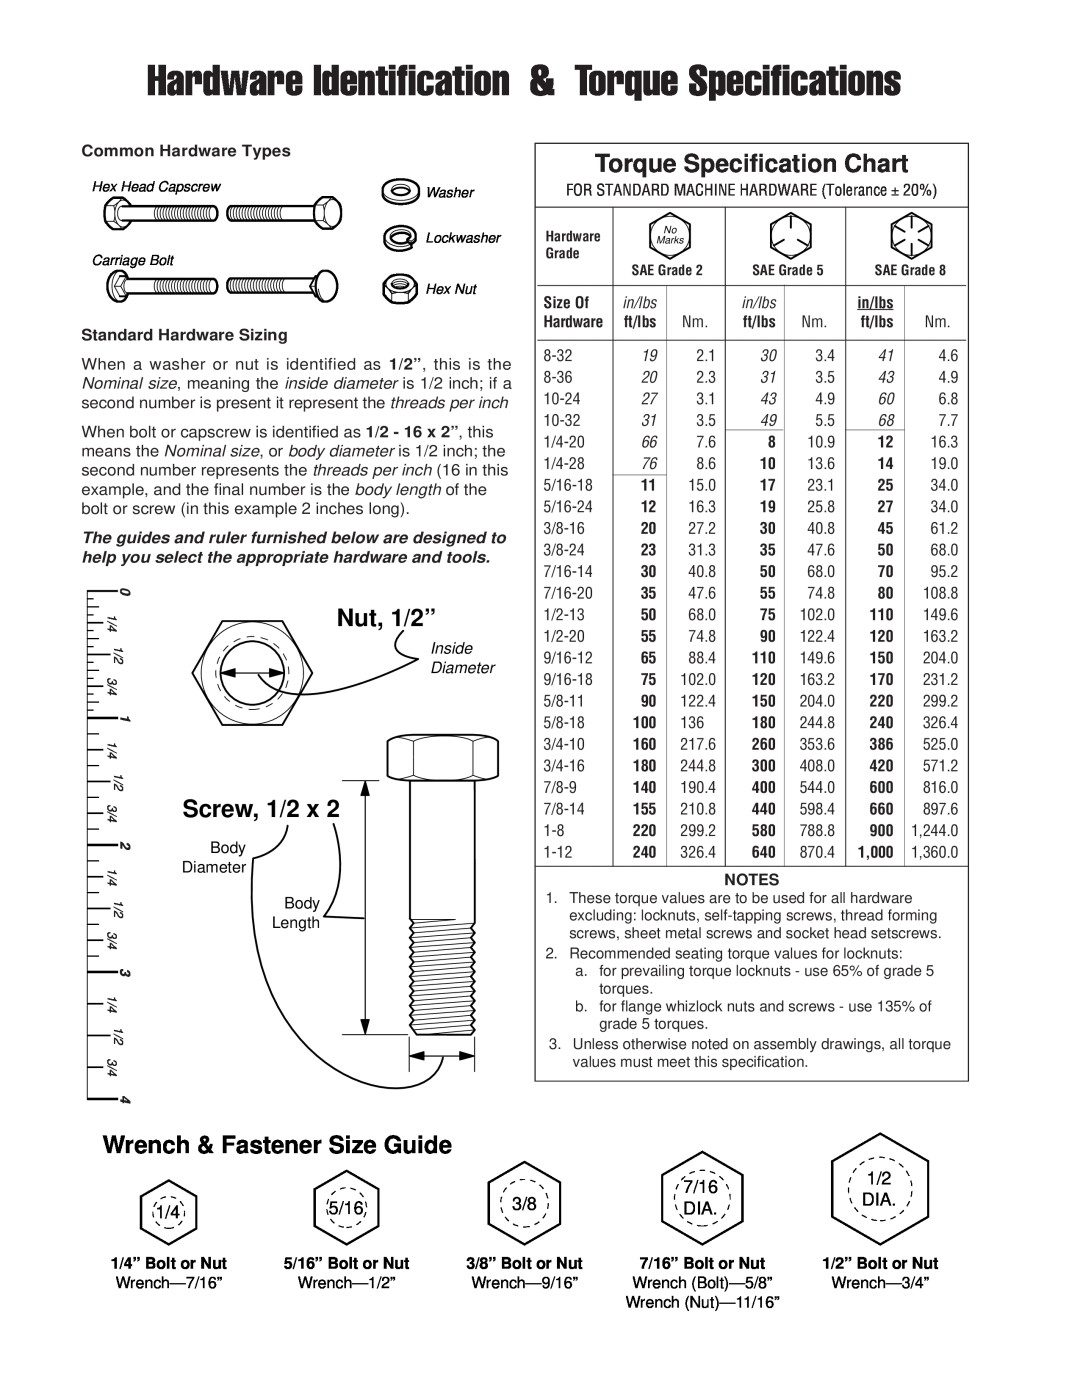 Simplicity 1693161 Torque Specification Chart, Hardware Identification & Torque Specifications, Nut, 1/2”, Screw, 1/2 x 